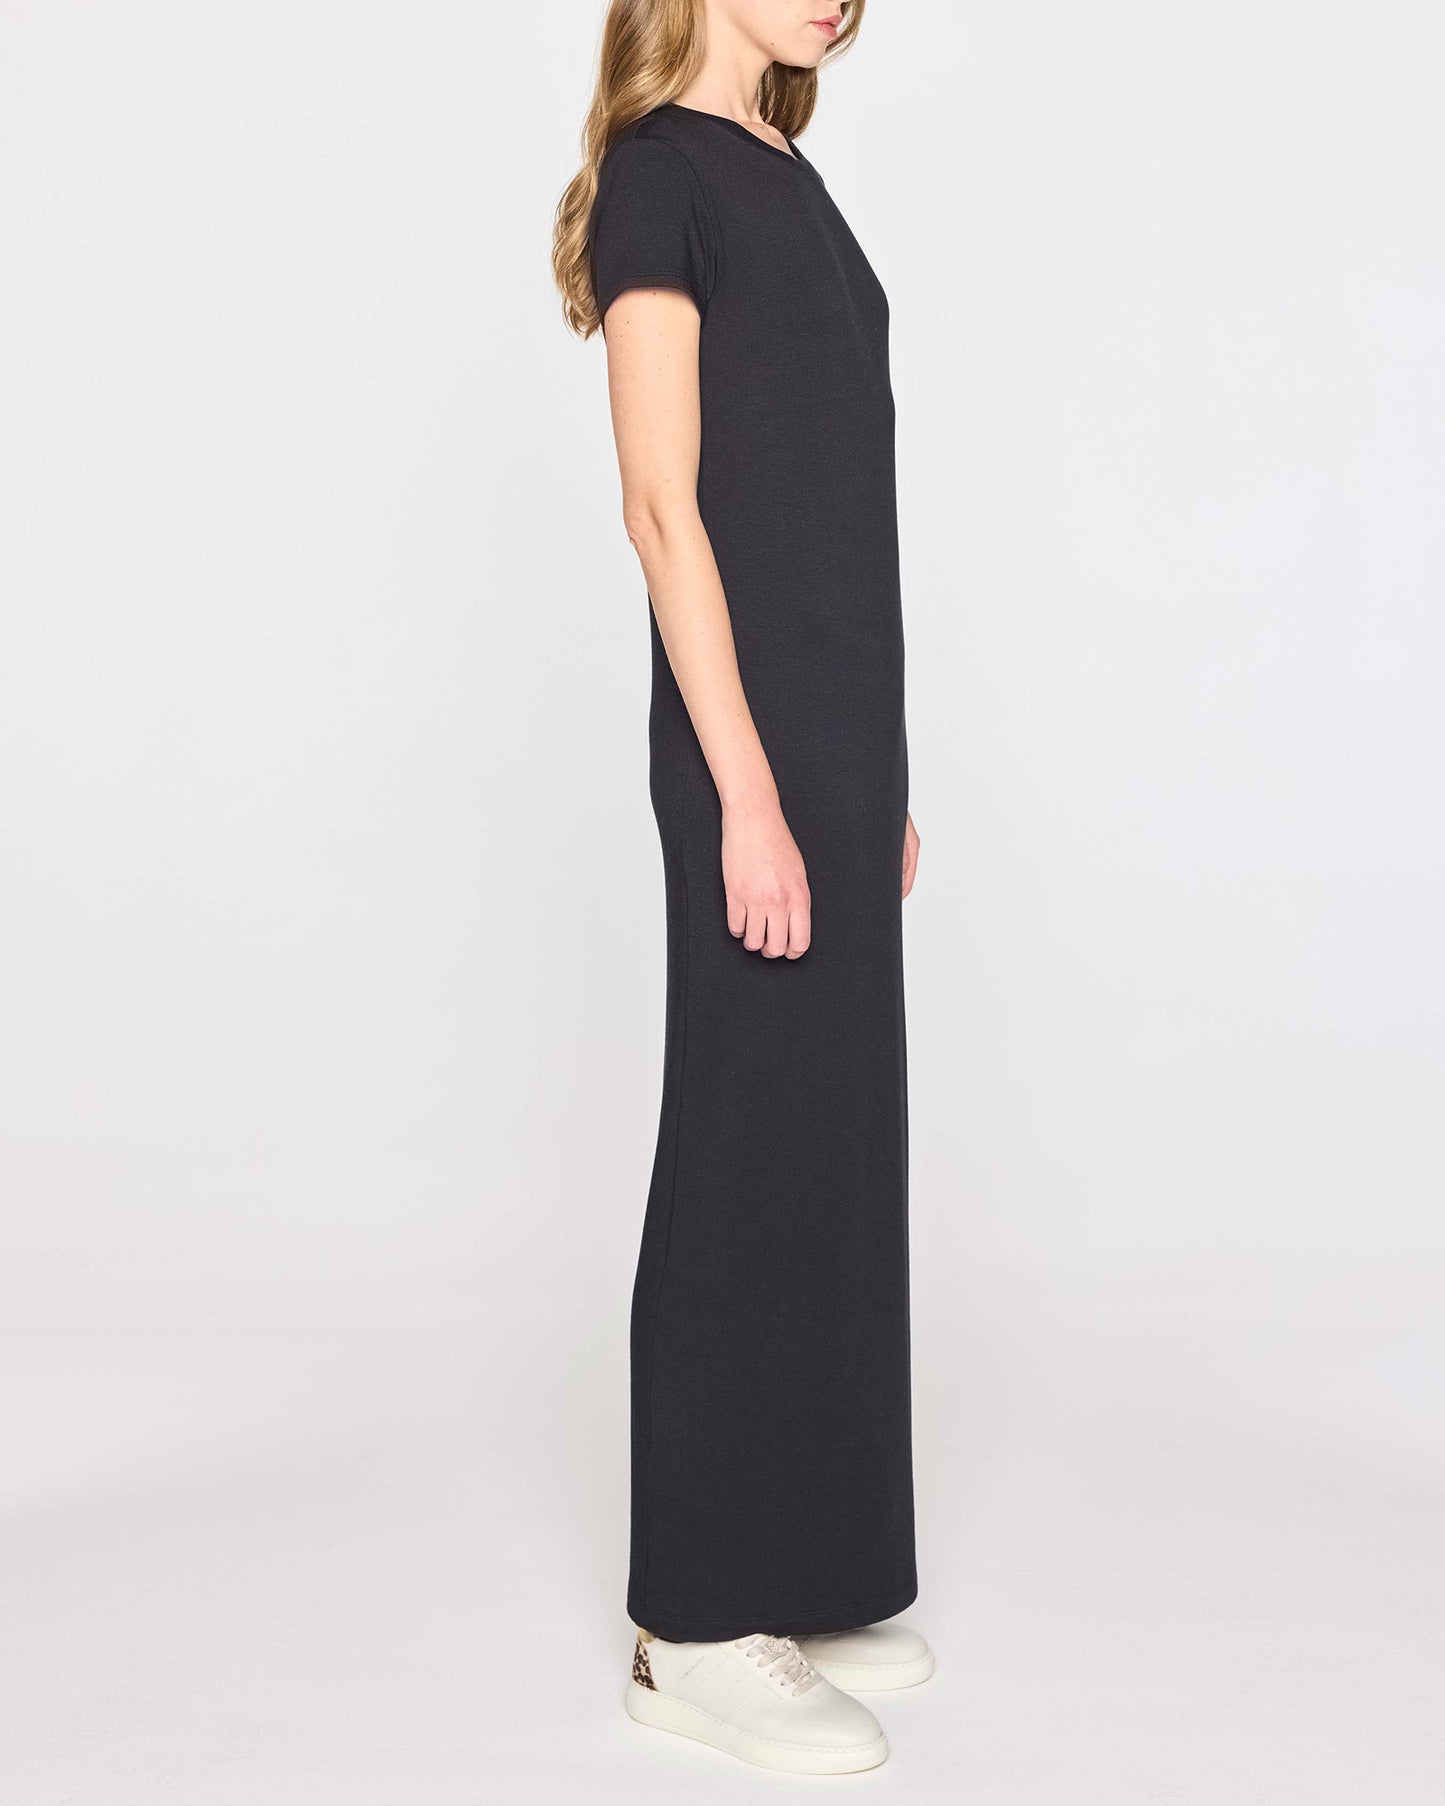 Black | The Perfect T Dress Side